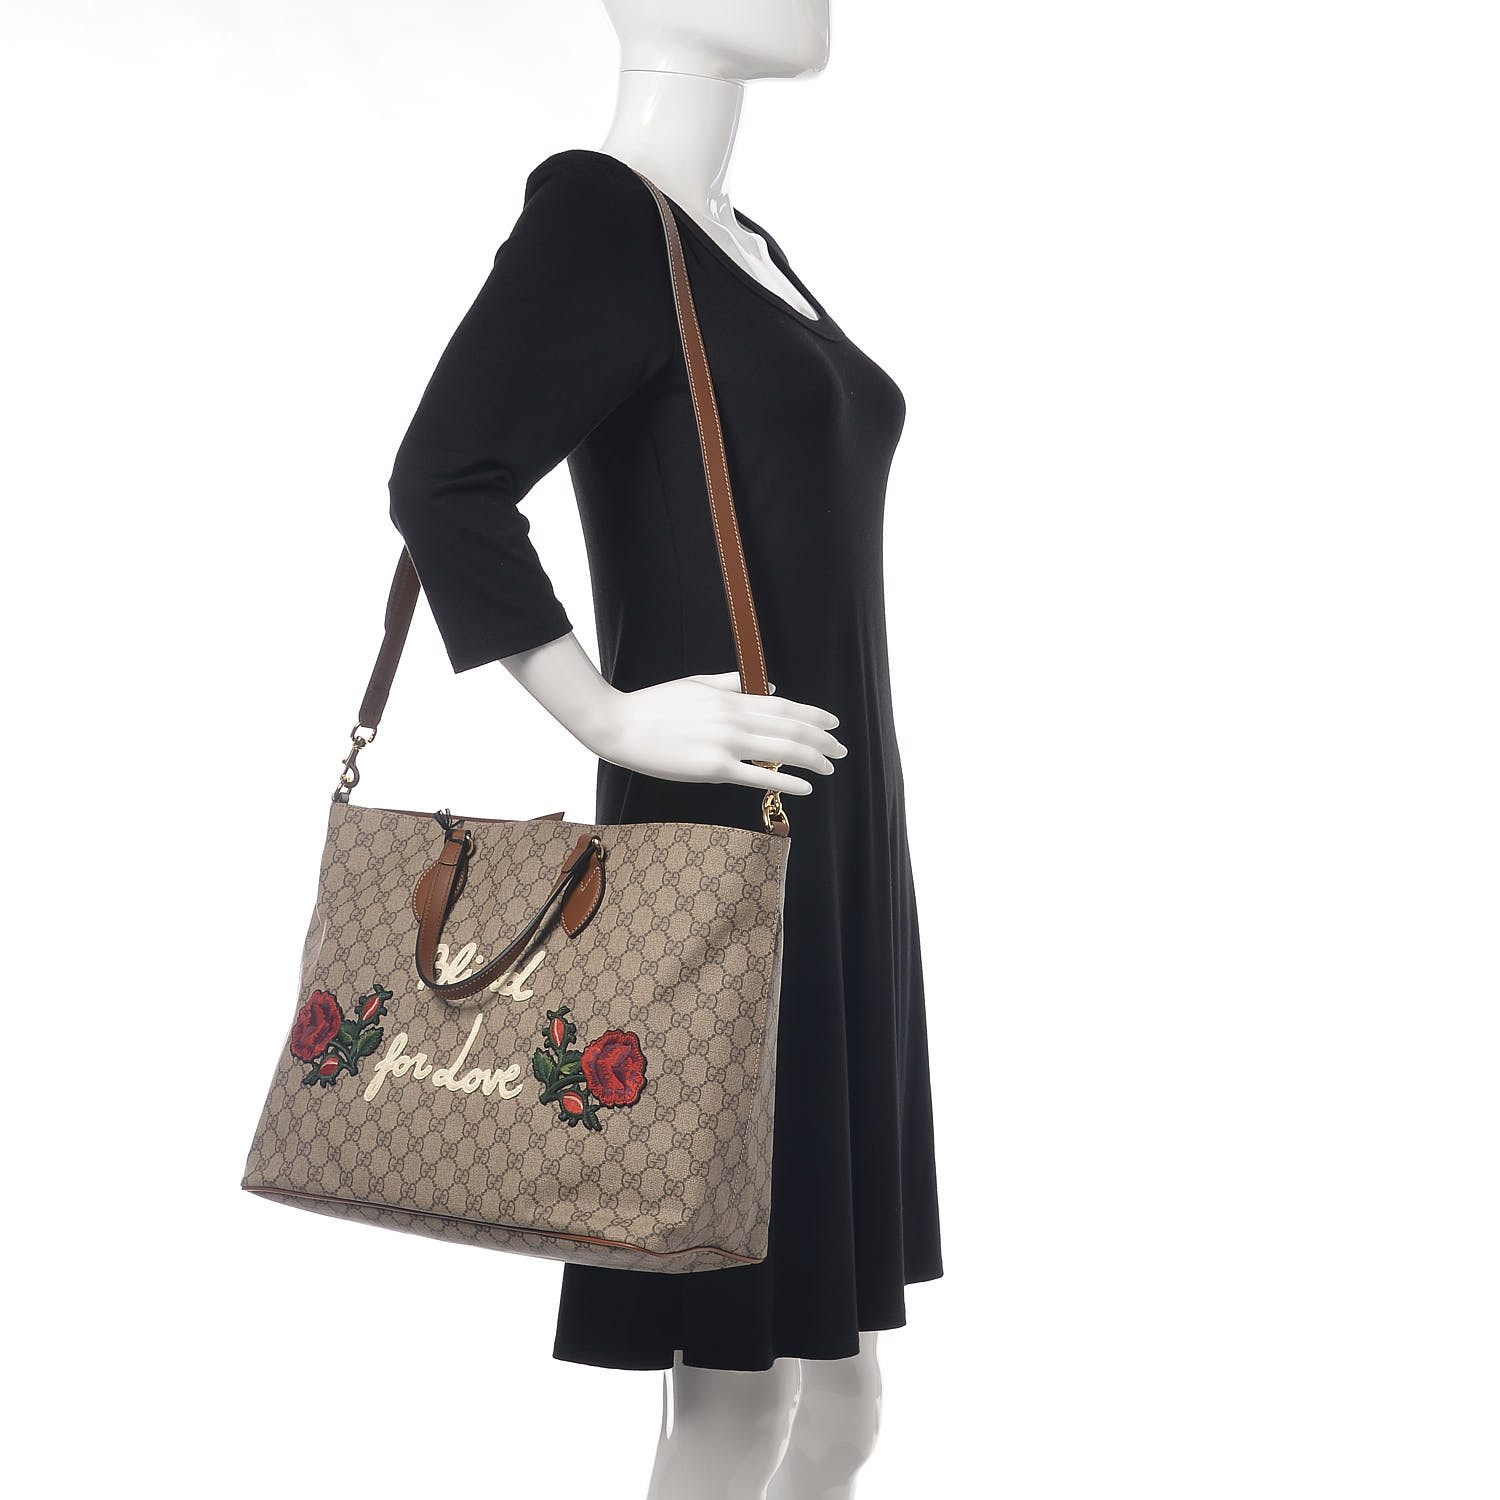 gucci blind for love tote